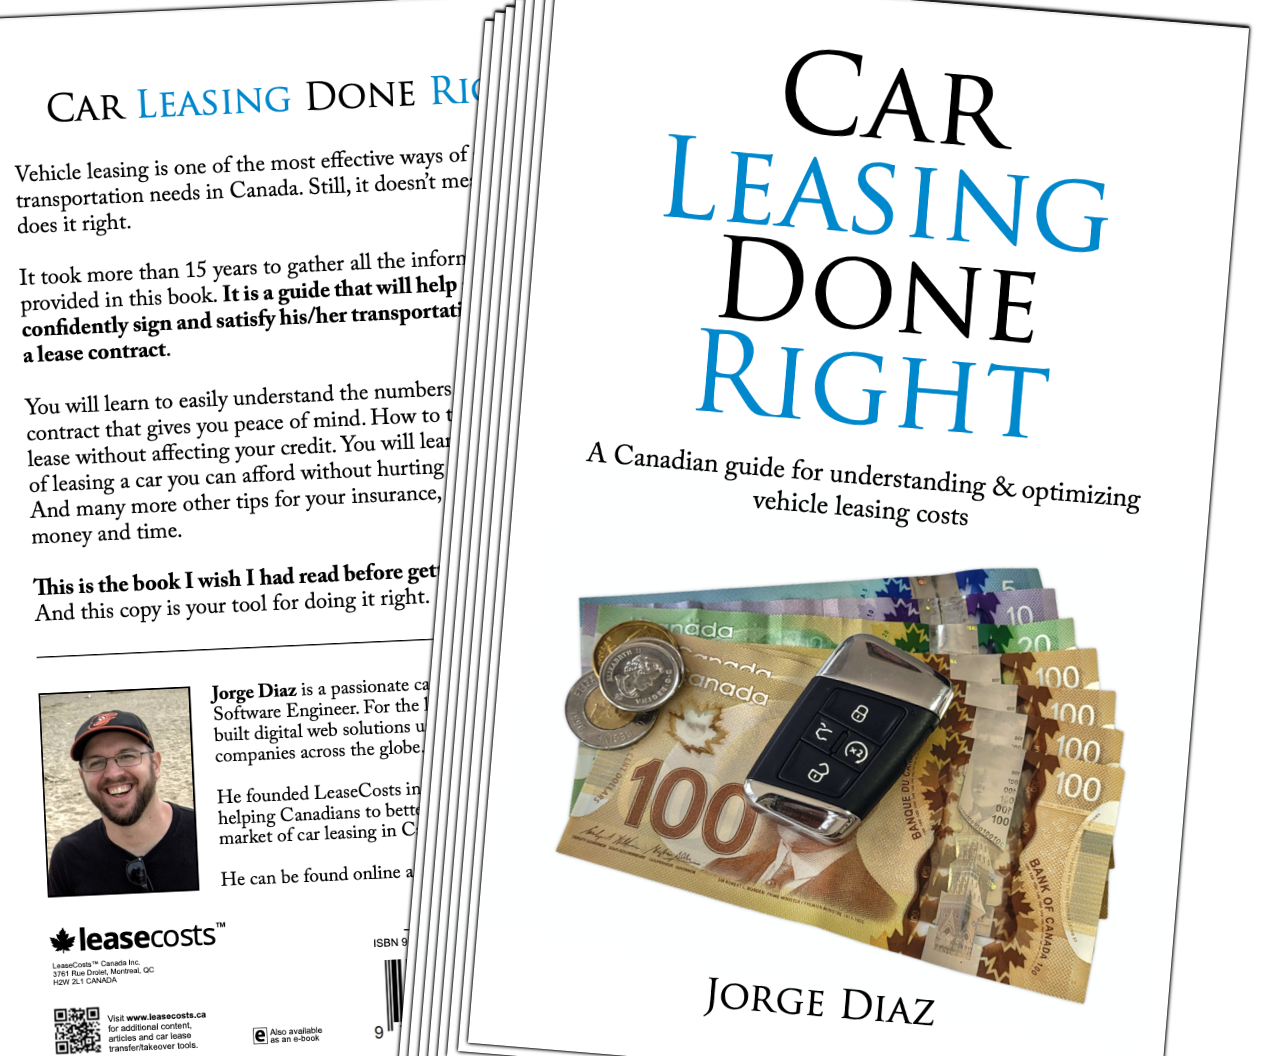 Car Leasing Done Right Book - Printed Version